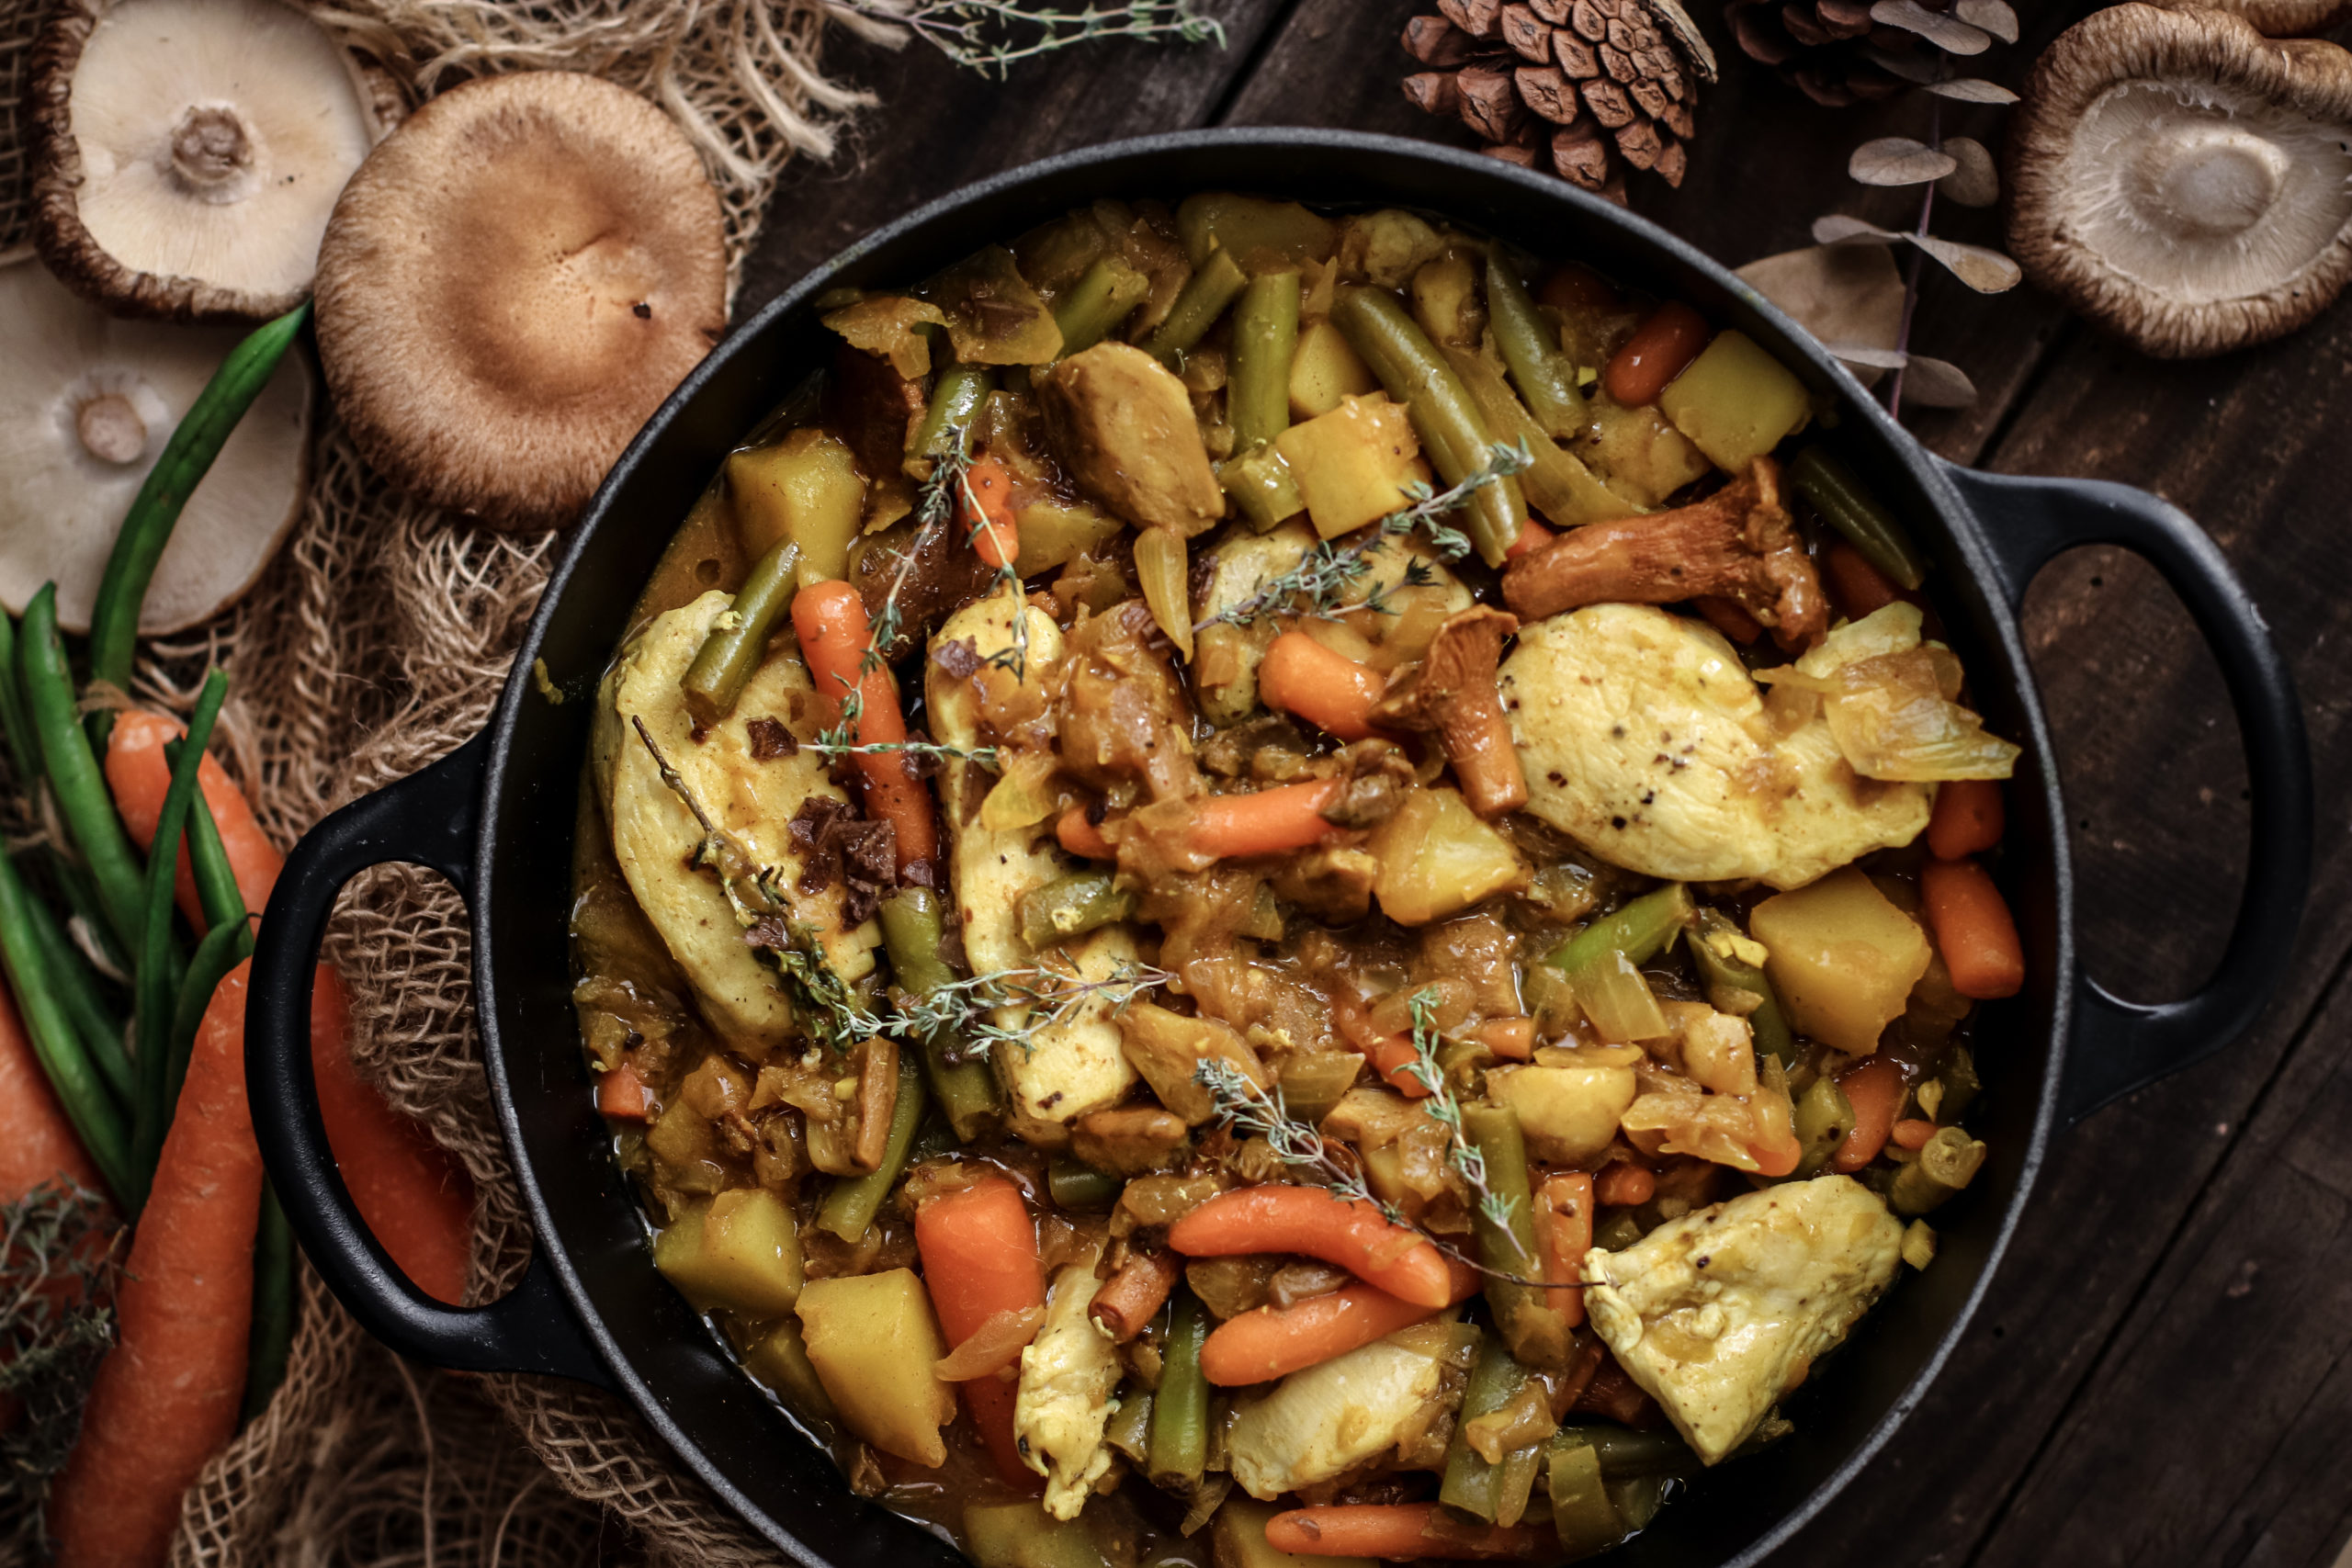 Turkey ragout with vegetables and mushrooms